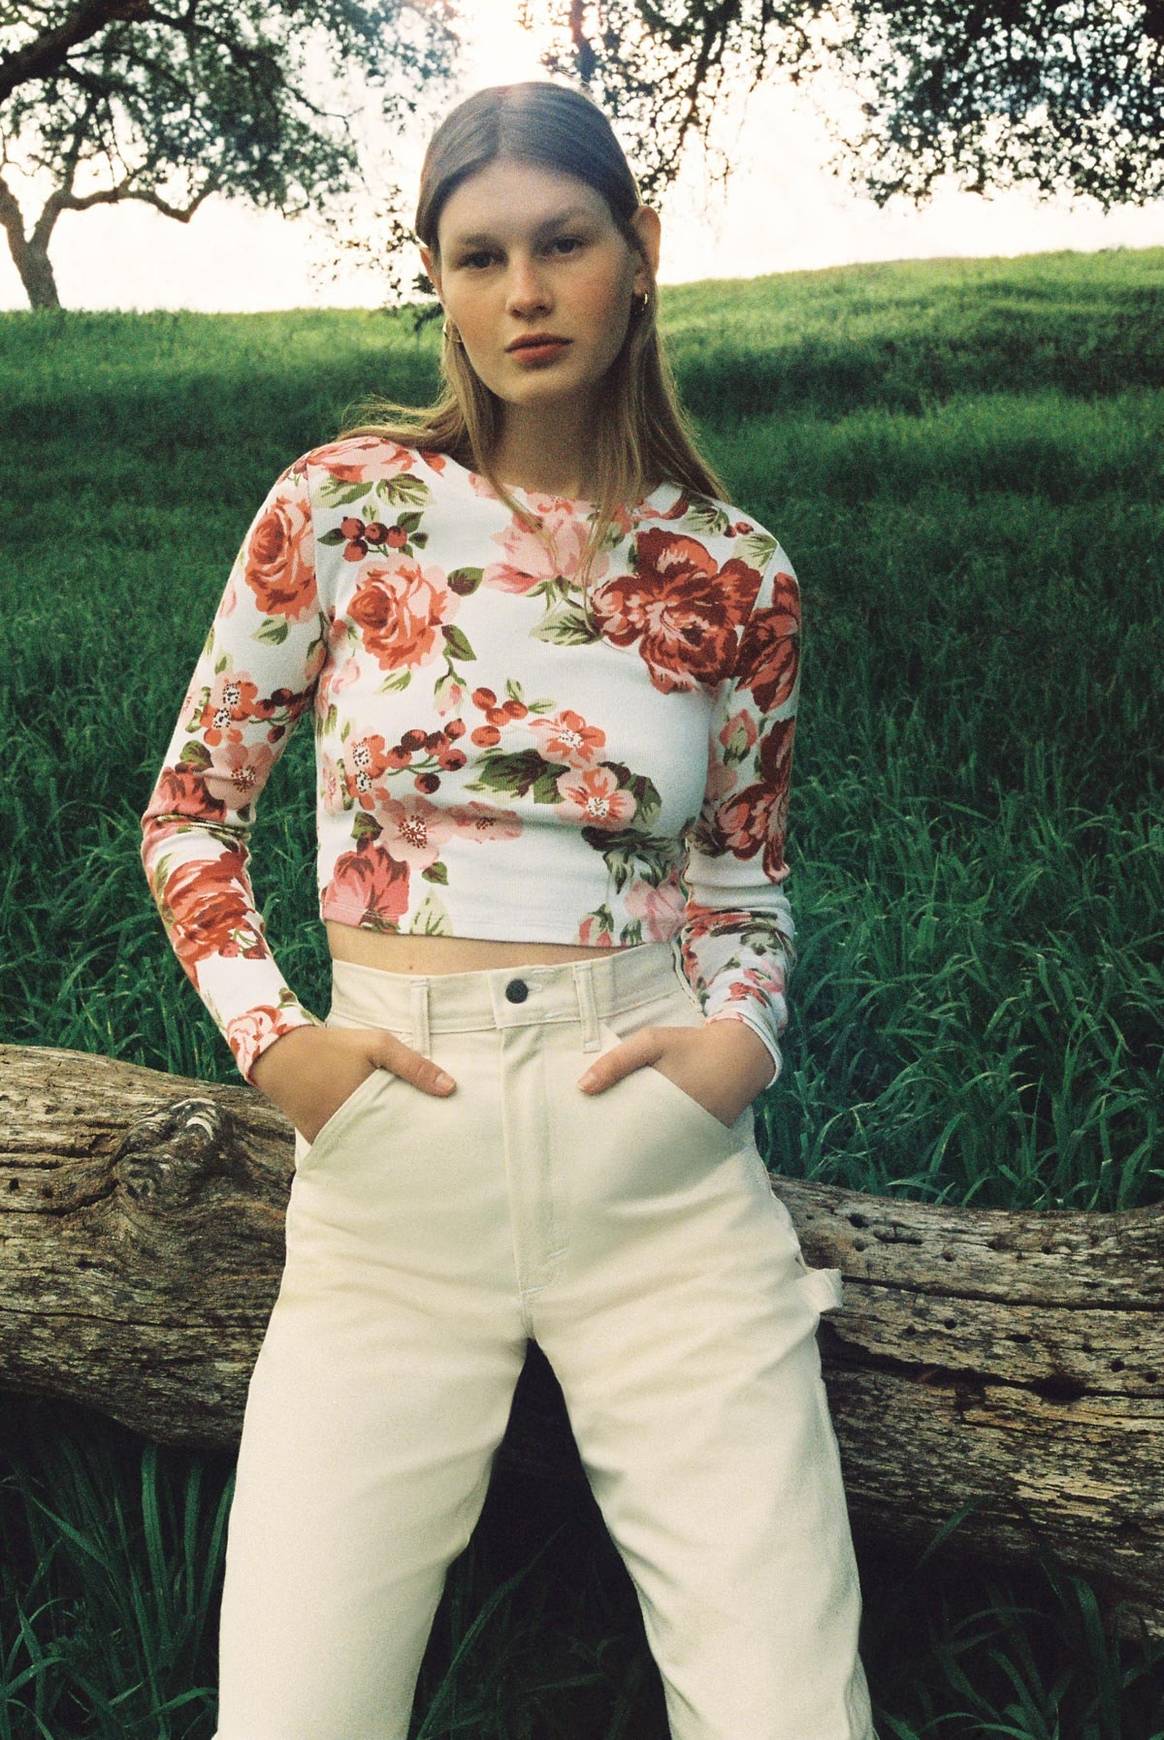 Urban Outfitters x Laura Ashley Will Make '80s Babies Feel So Seen -  SHEfinds